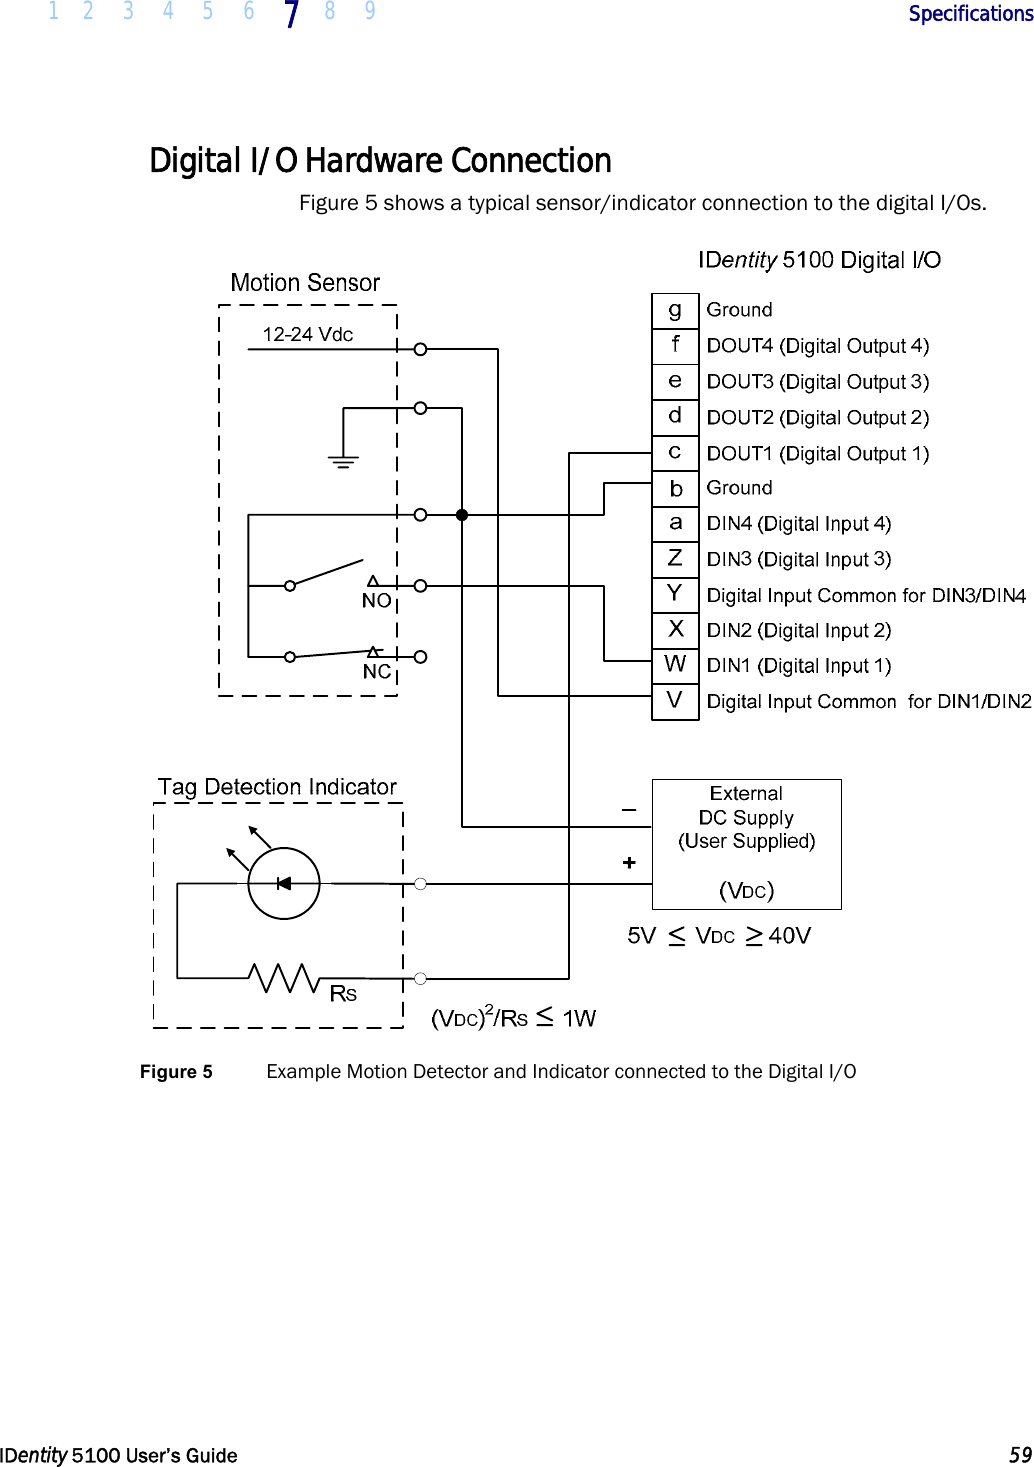  1 2 3 4 5 6 7 8 9       Specifications   IDentity 5100 User’s Guide  59  Digital I/O Hardware Connection Figure 5 shows a typical sensor/indicator connection to the digital I/Os.  Figure 5  Example Motion Detector and Indicator connected to the Digital I/O    